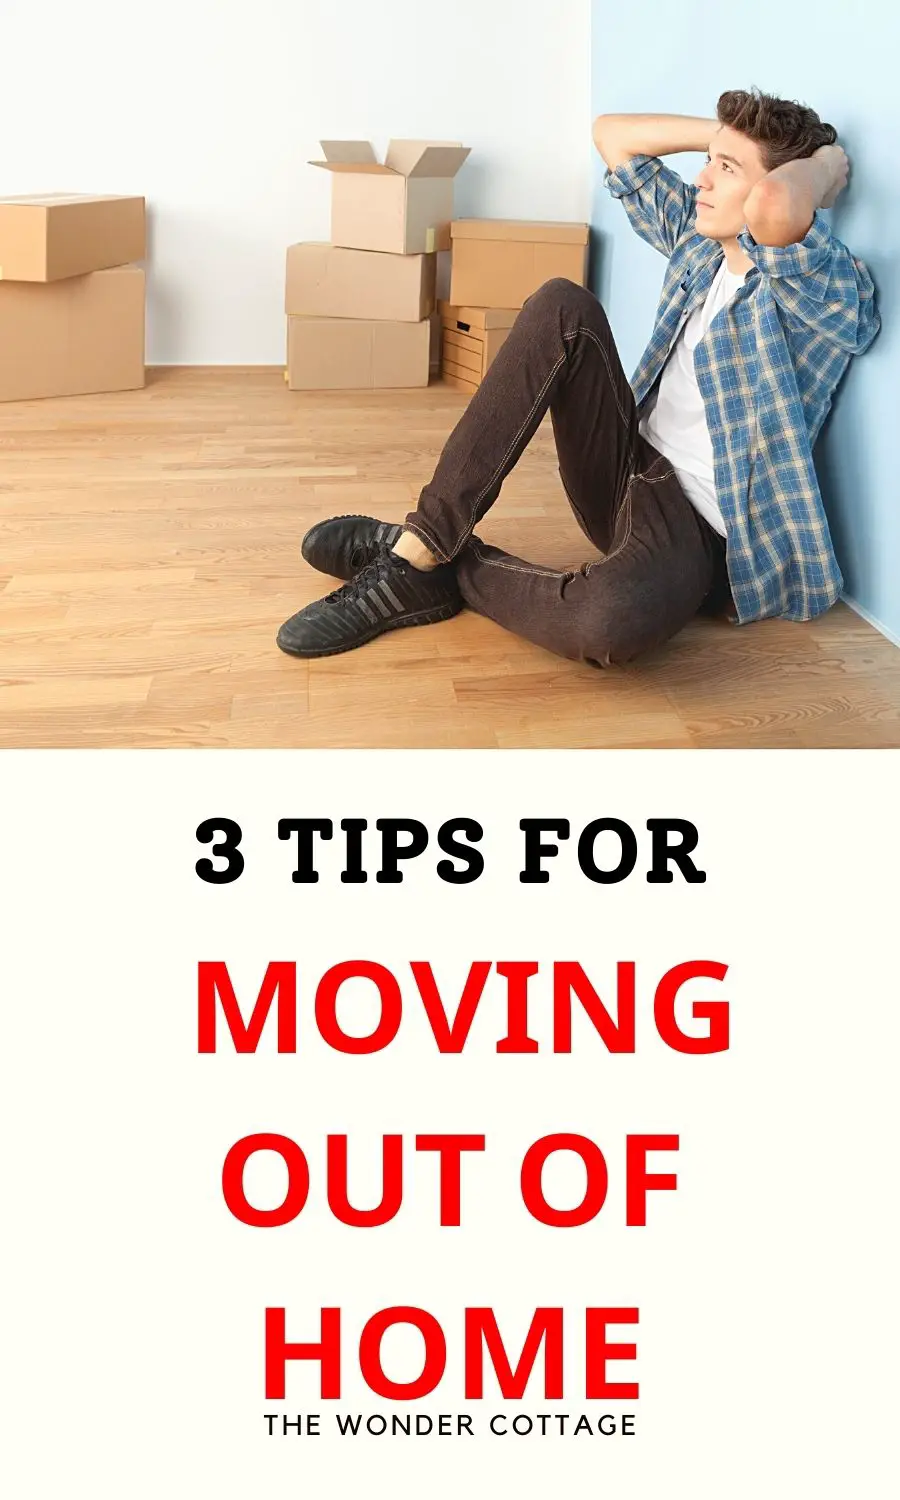 3 tips for moving out of home